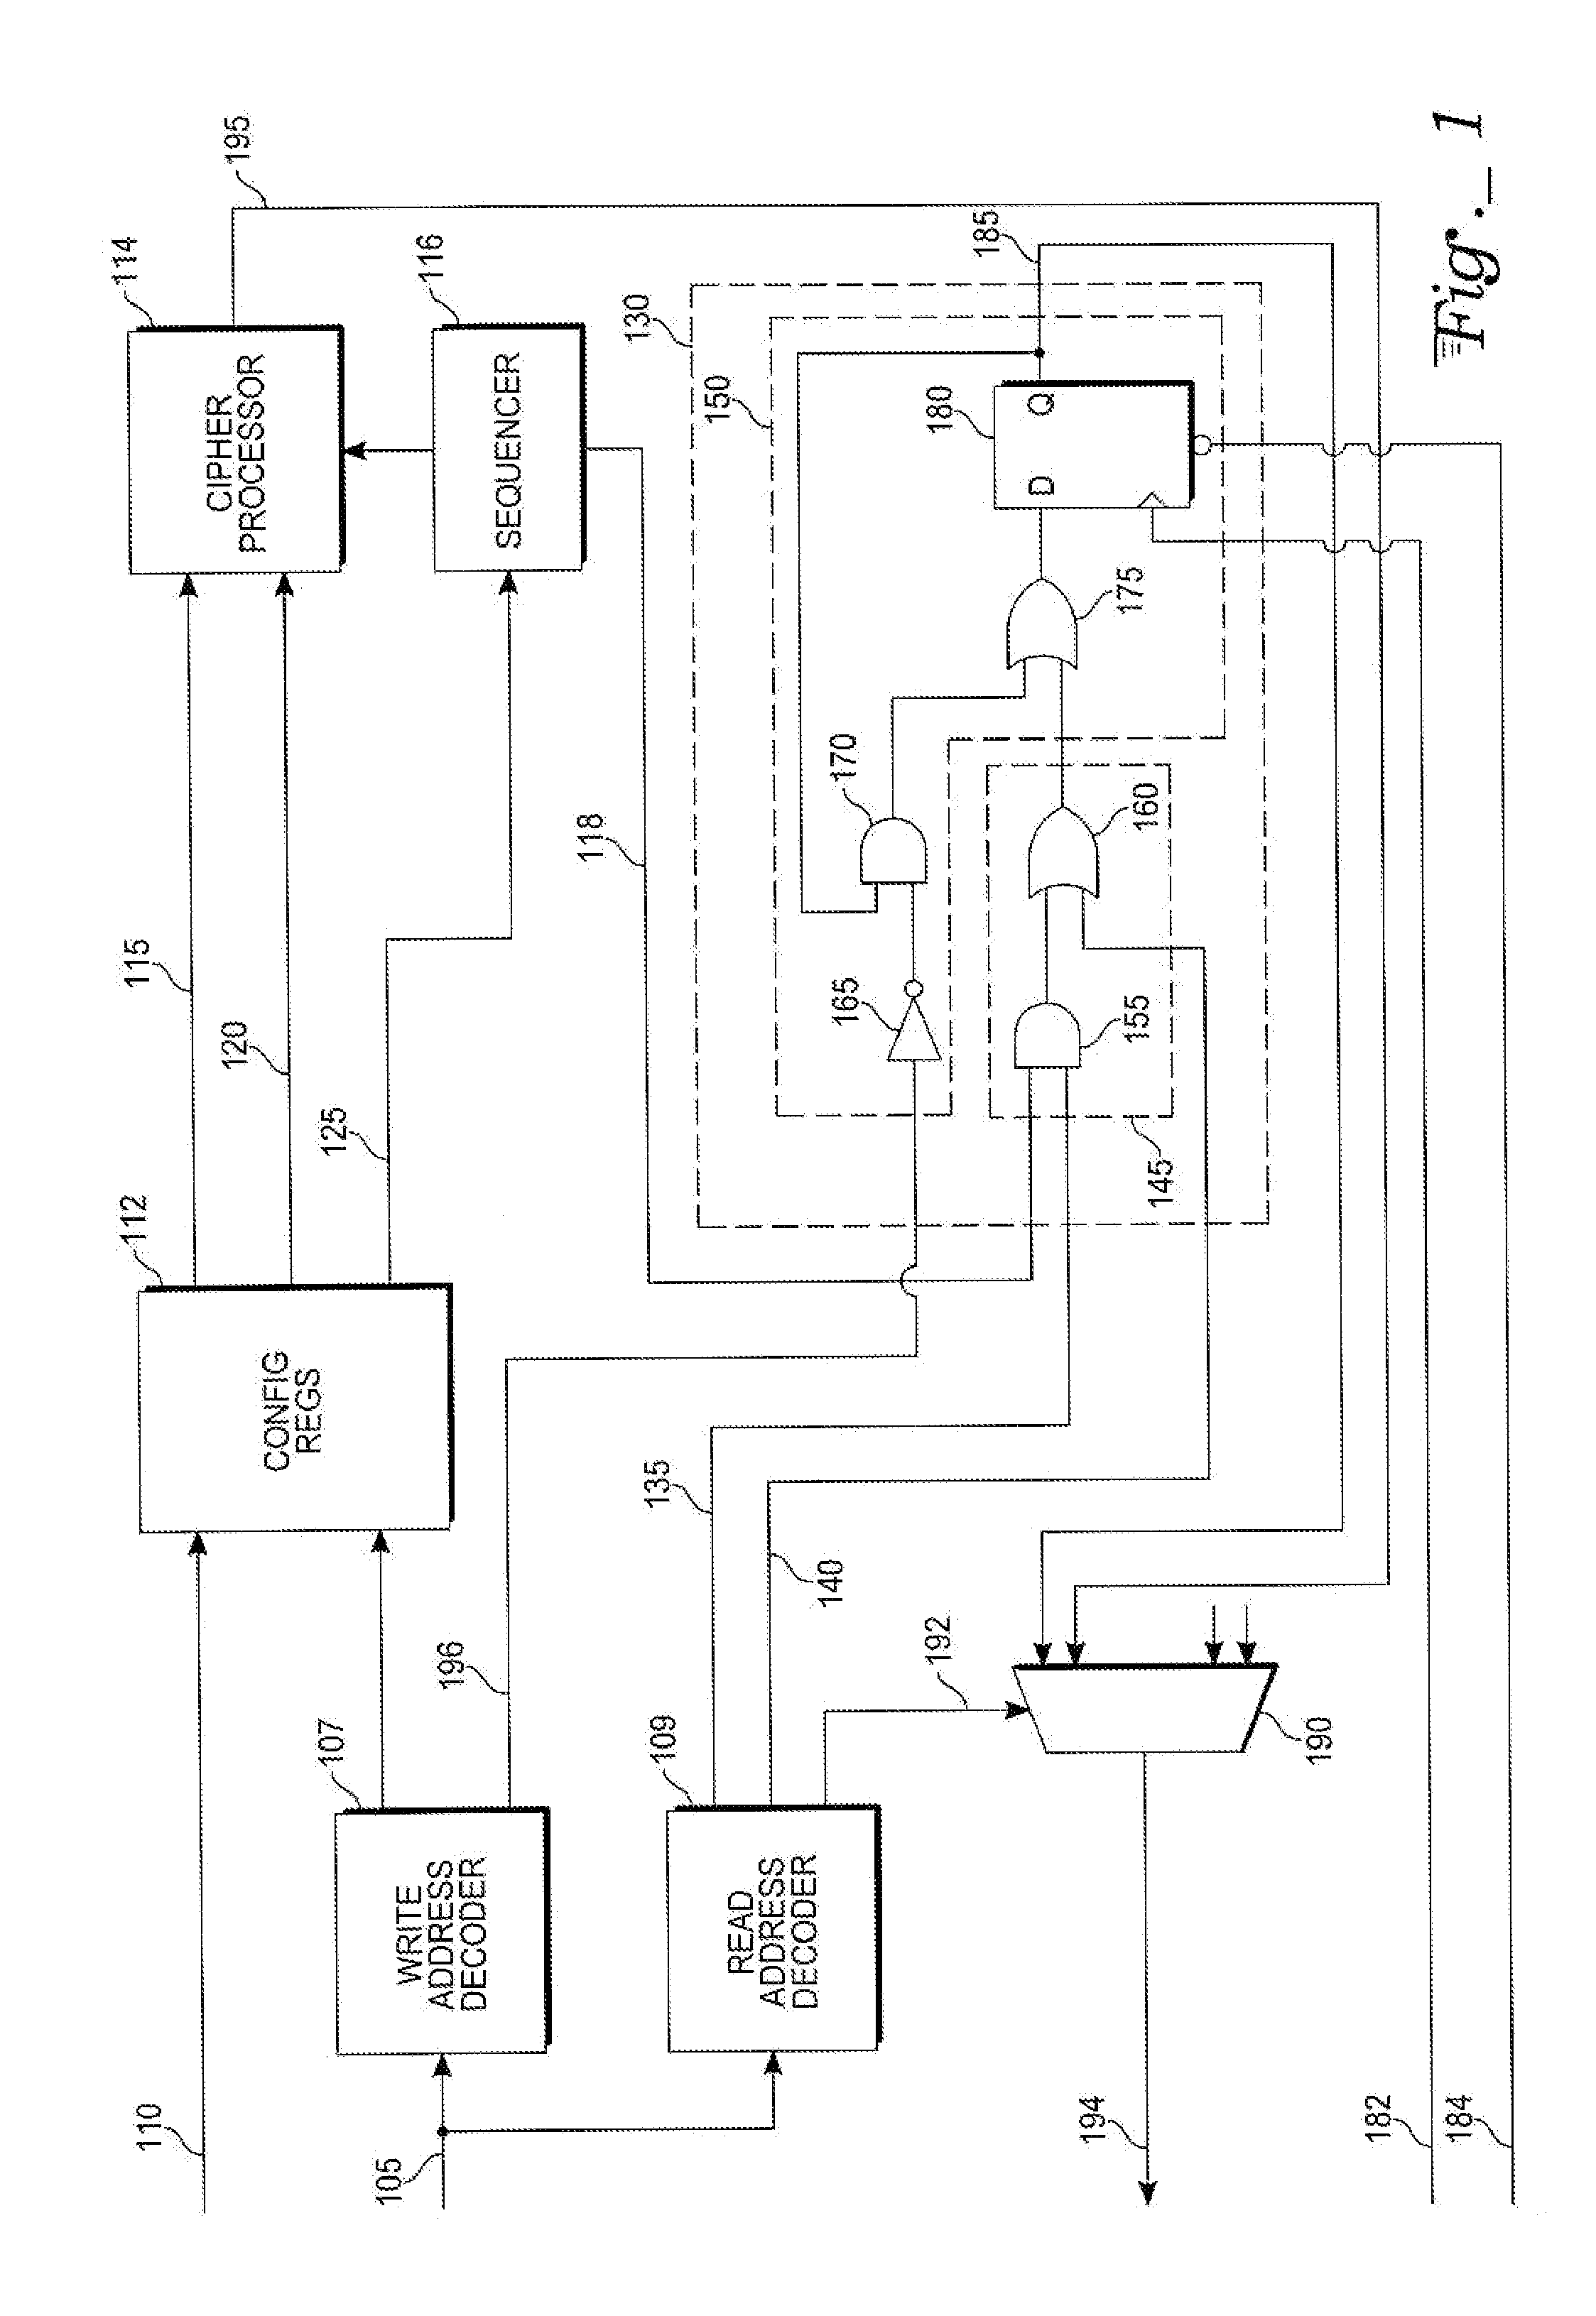 Apparatus and method for the detection of and recovery from inappropriate bus access in microcontroller circuits